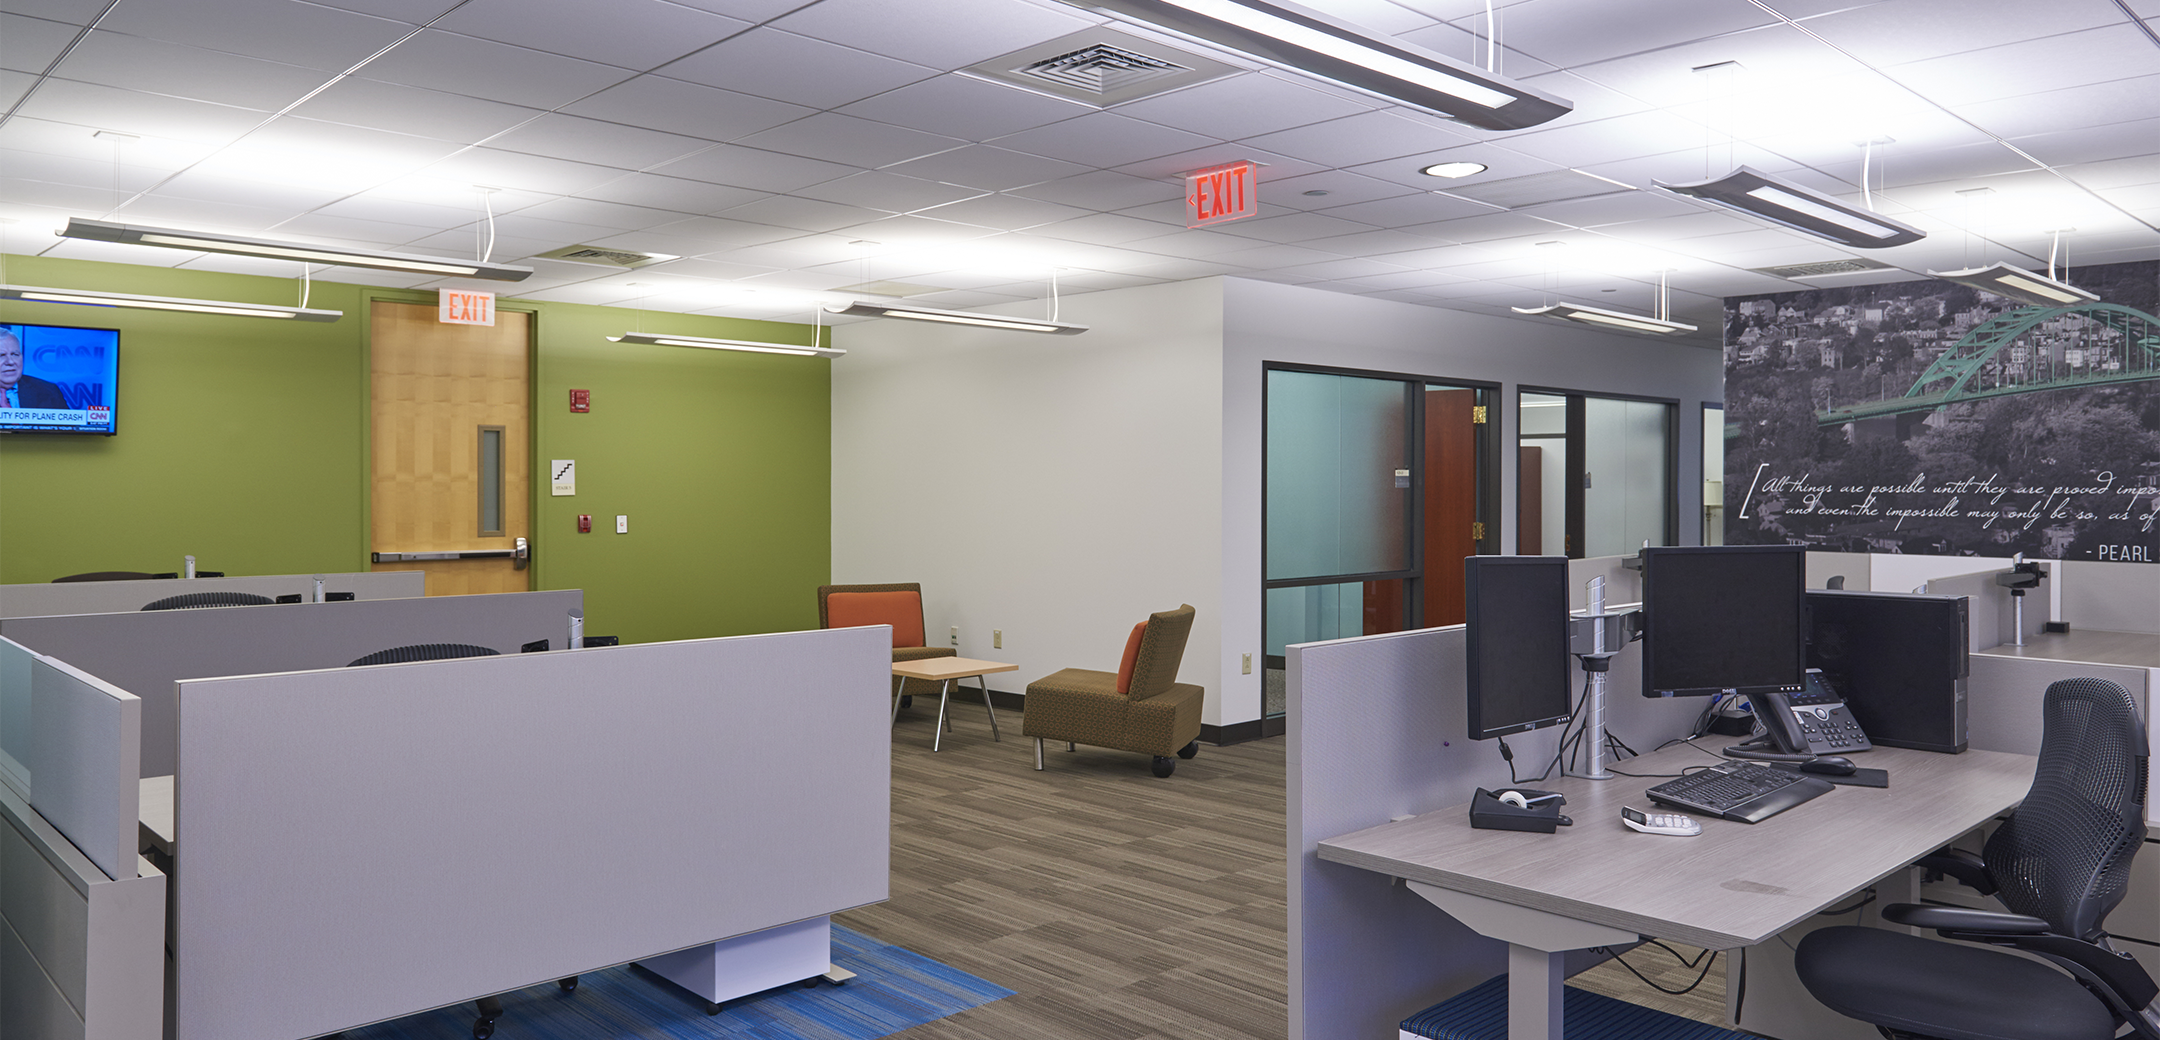 An open office area with several cubicles, a conference room with frosted glass, and a mural with a quote on the back wall.